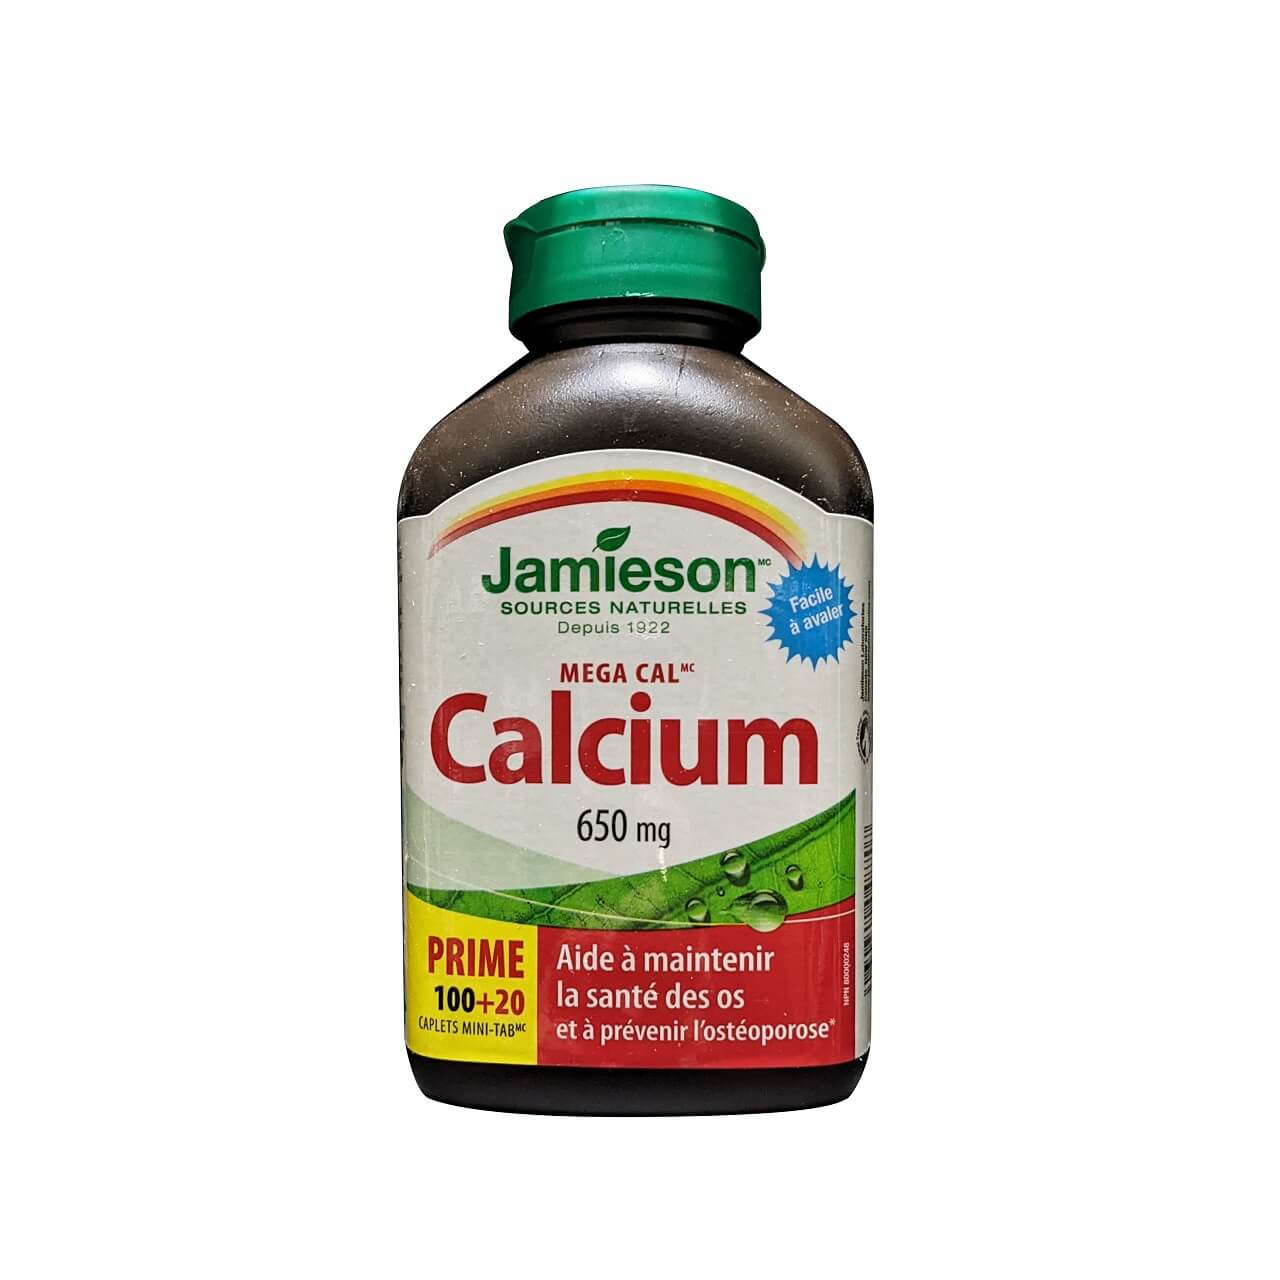 Product label for Jamieson Mega Cal Calcium 650 mg (120 caplets) in French